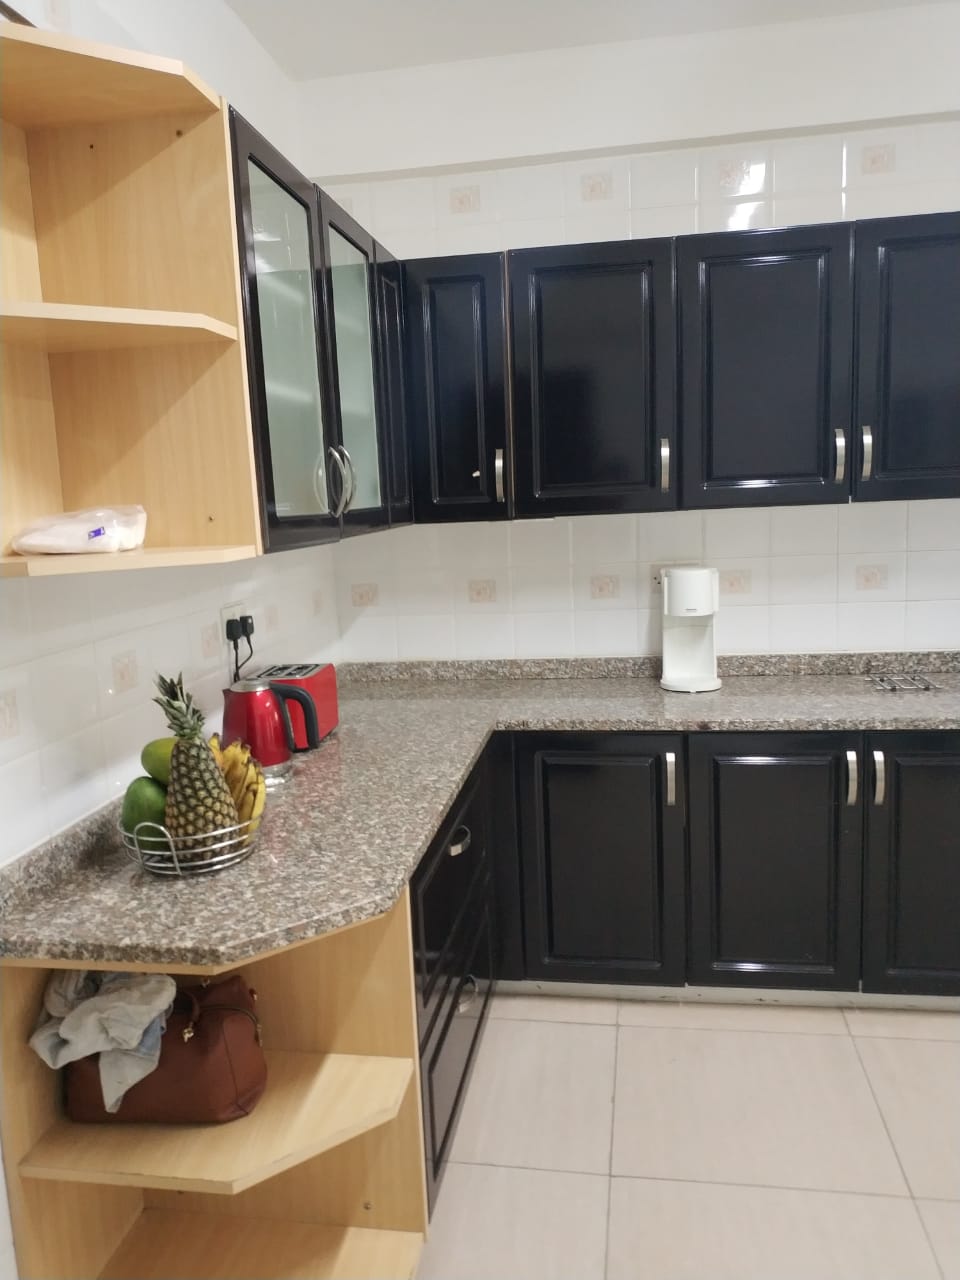 Four 4-Bedroom House for Rent in Gated Community at Cantonments